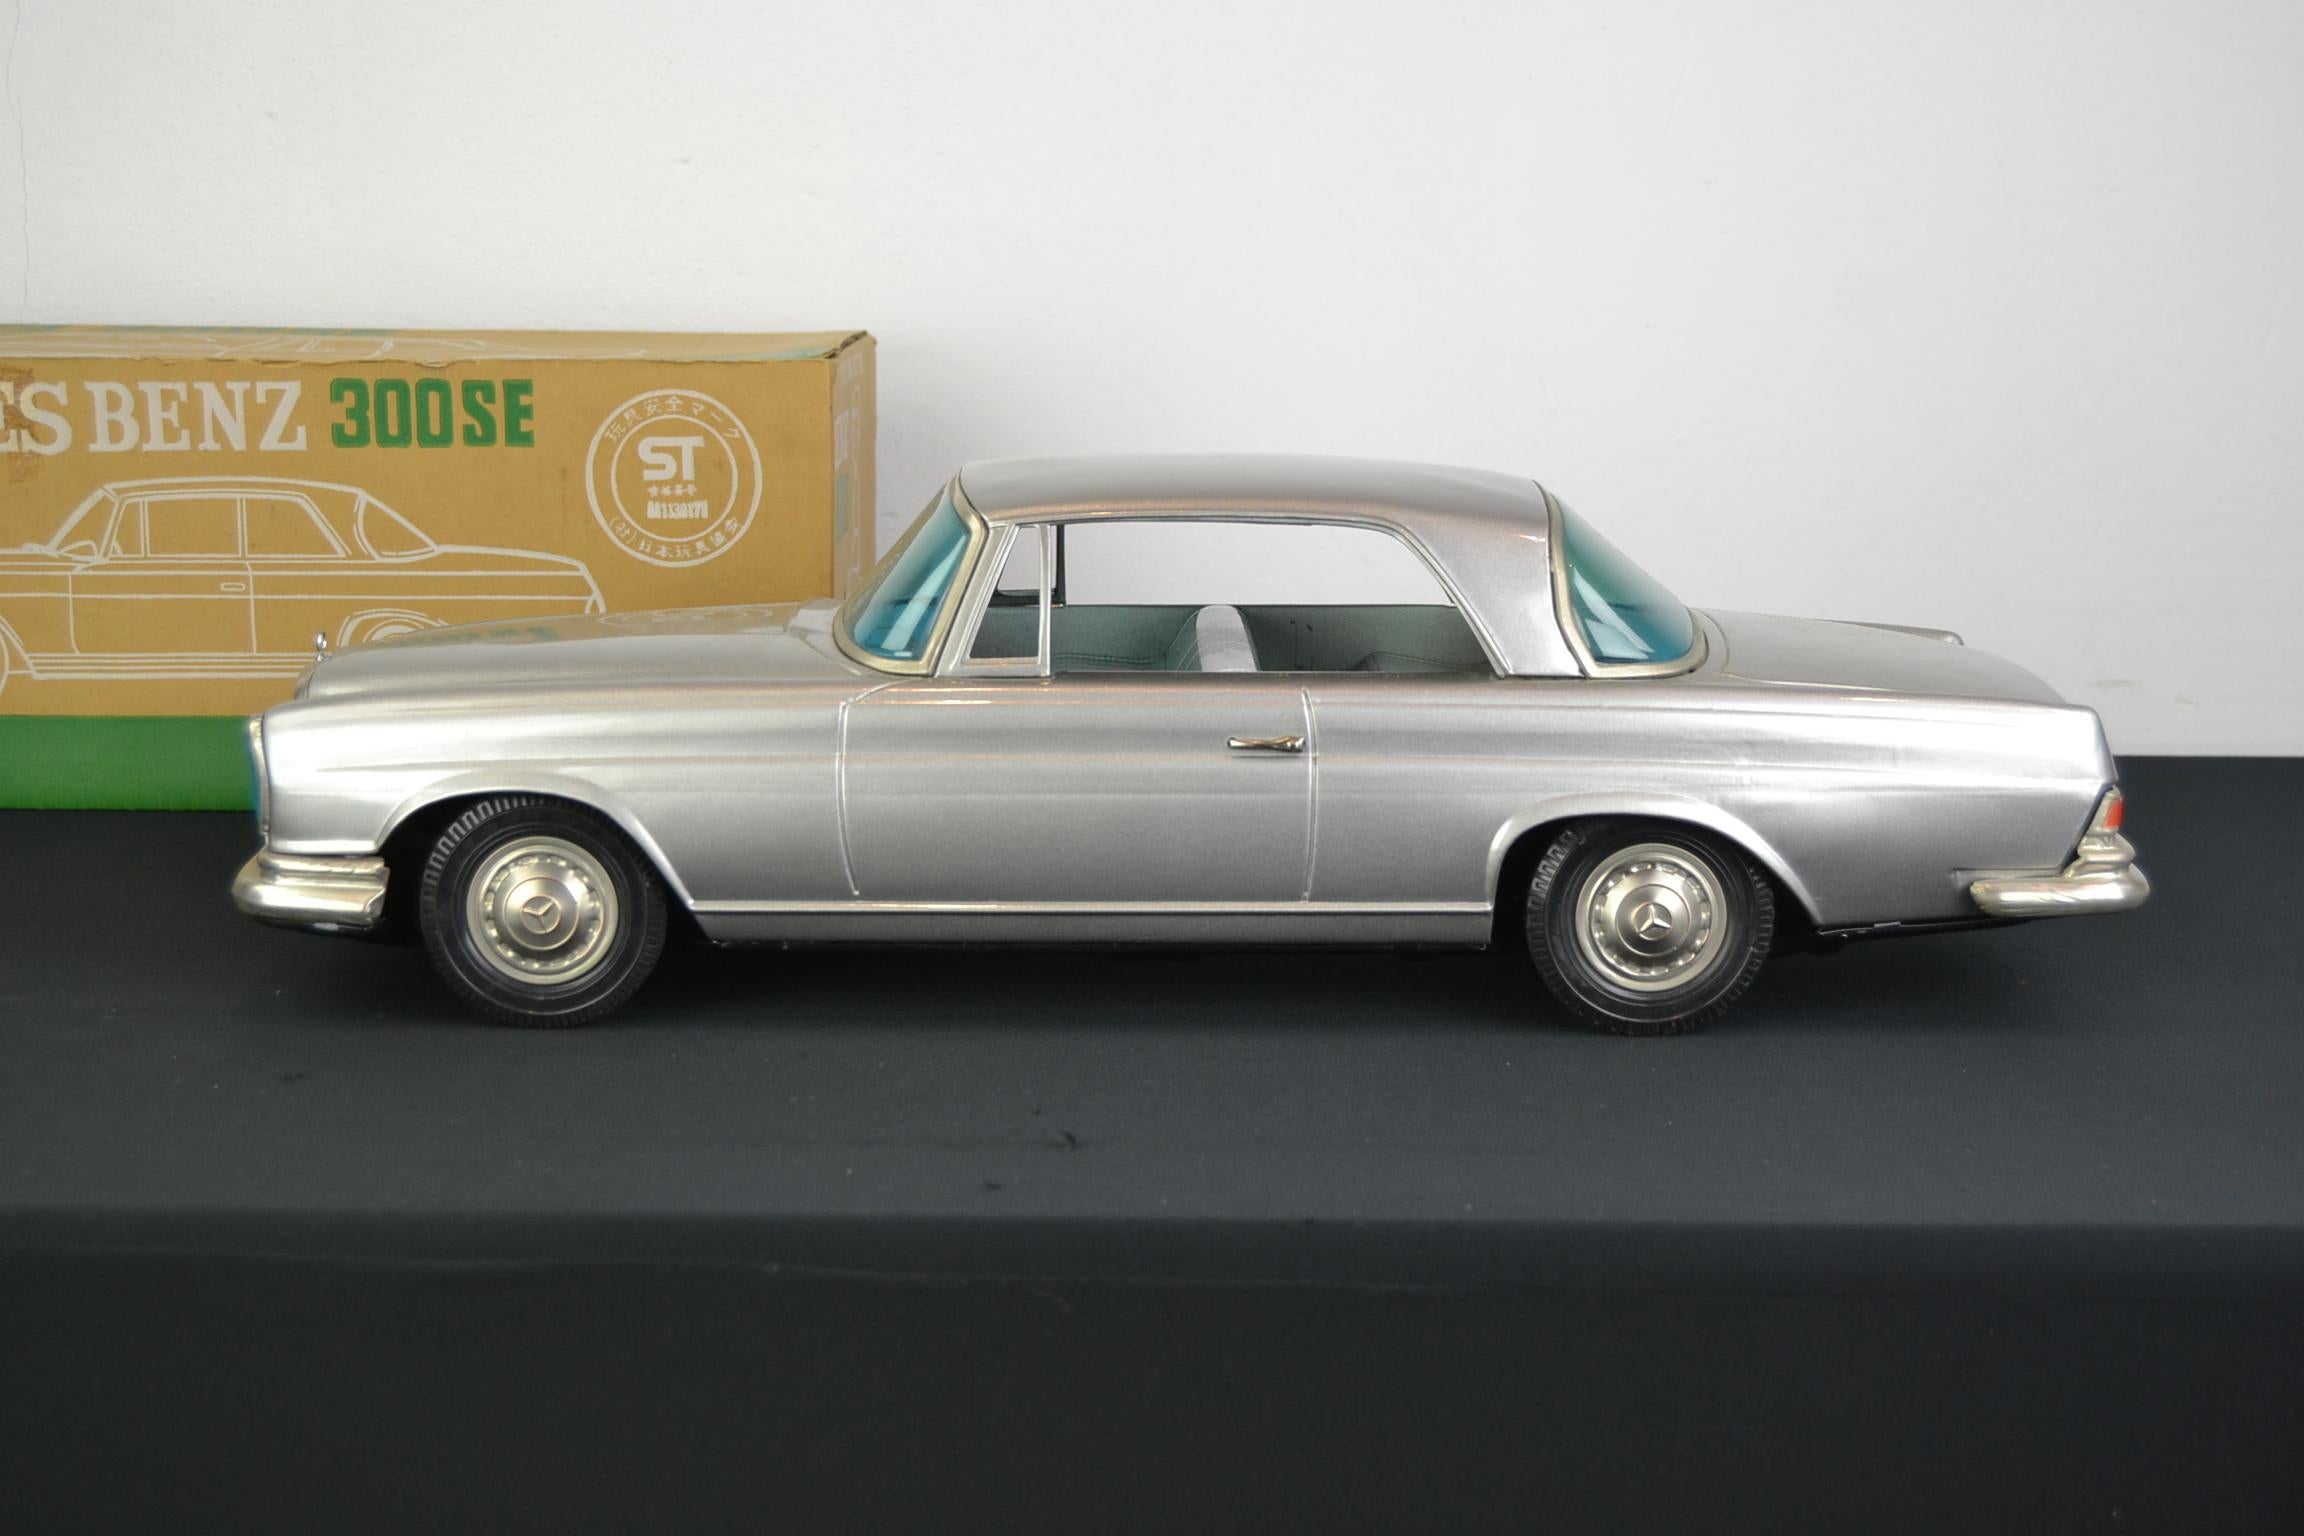 20th Century Boxed Mercedes Benz 300 SE Toy Model by Ichiko Japan, 1980s